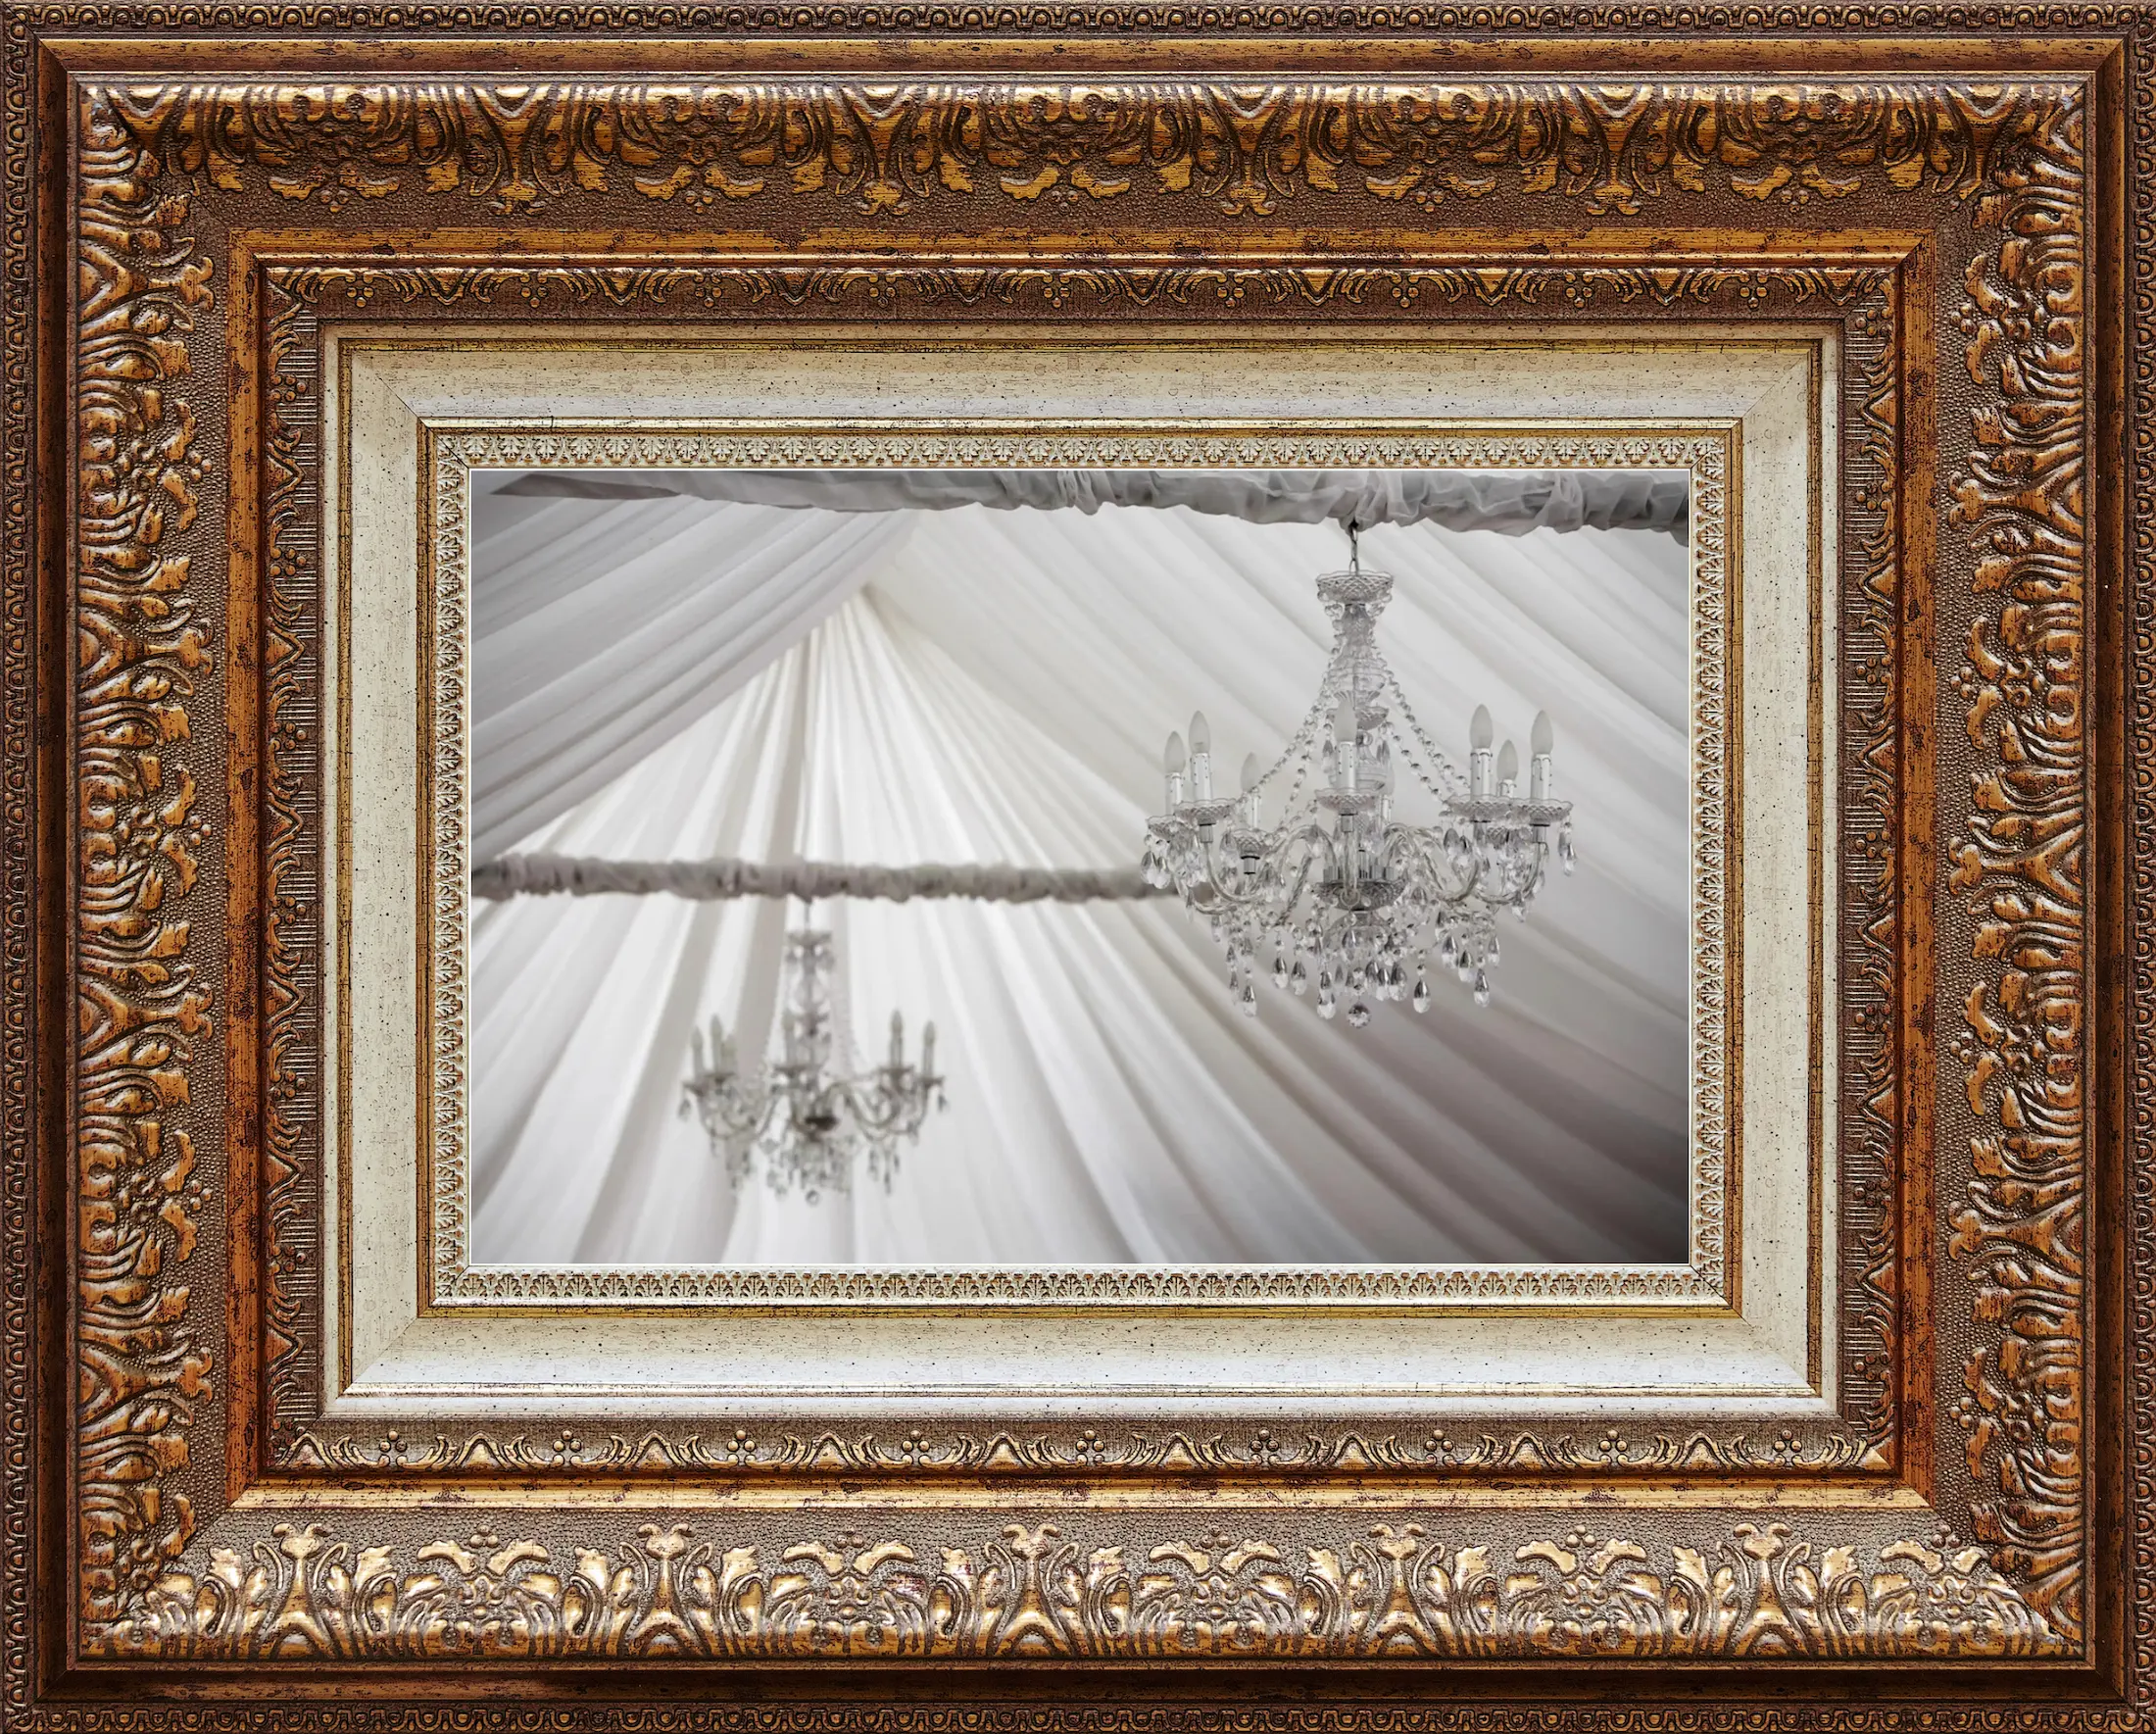 Image of chandeliers in a marquee